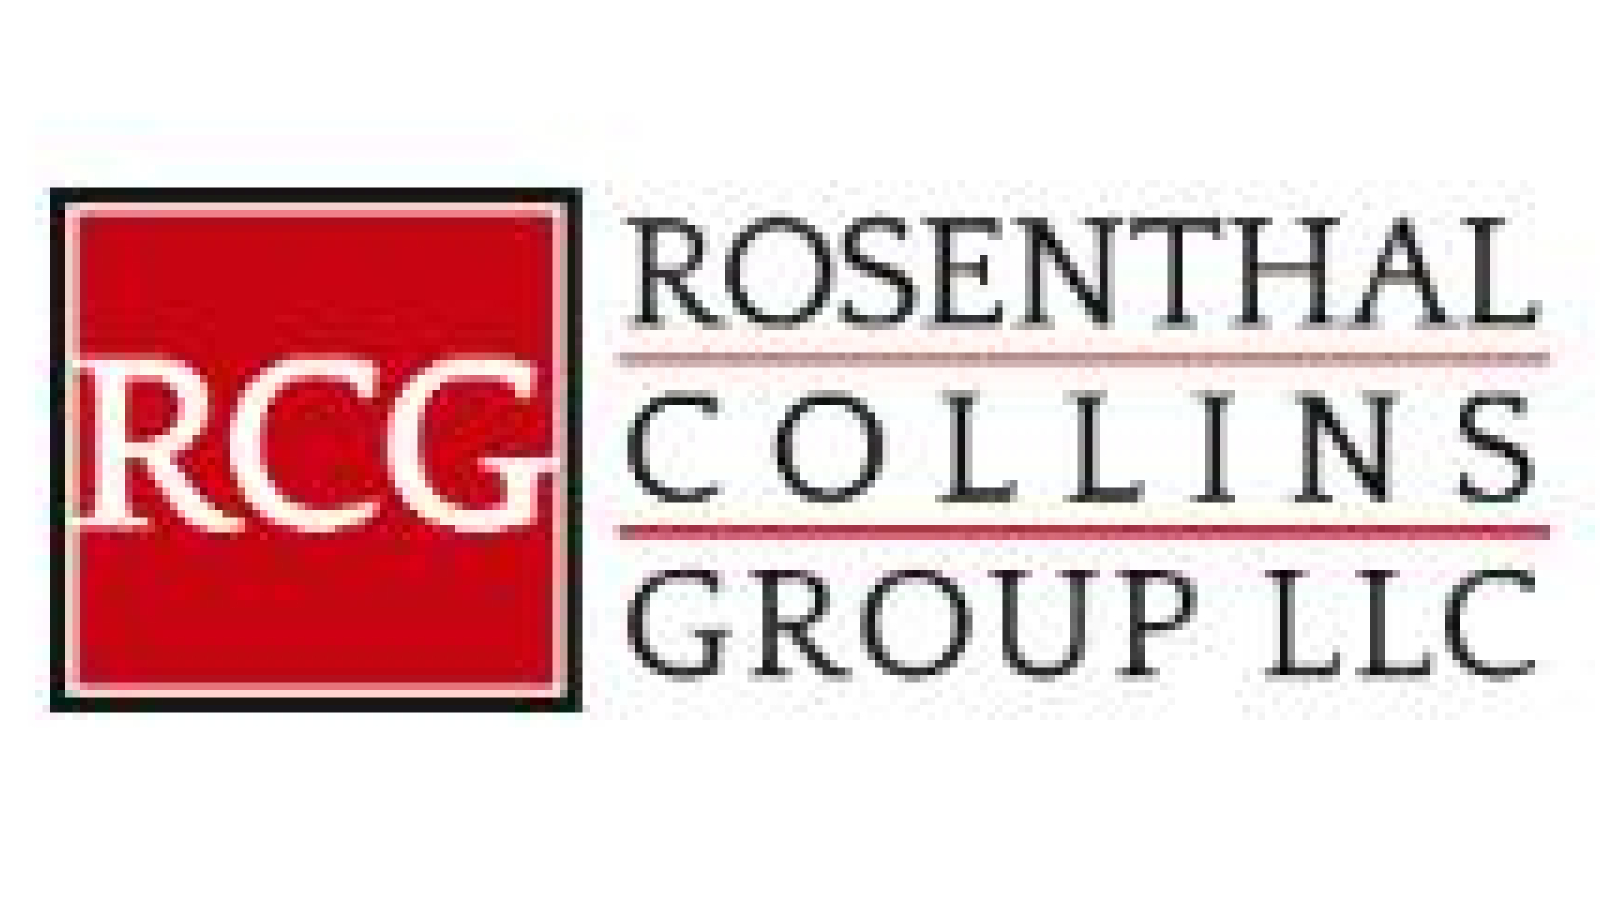 Rosenthal Collins Group